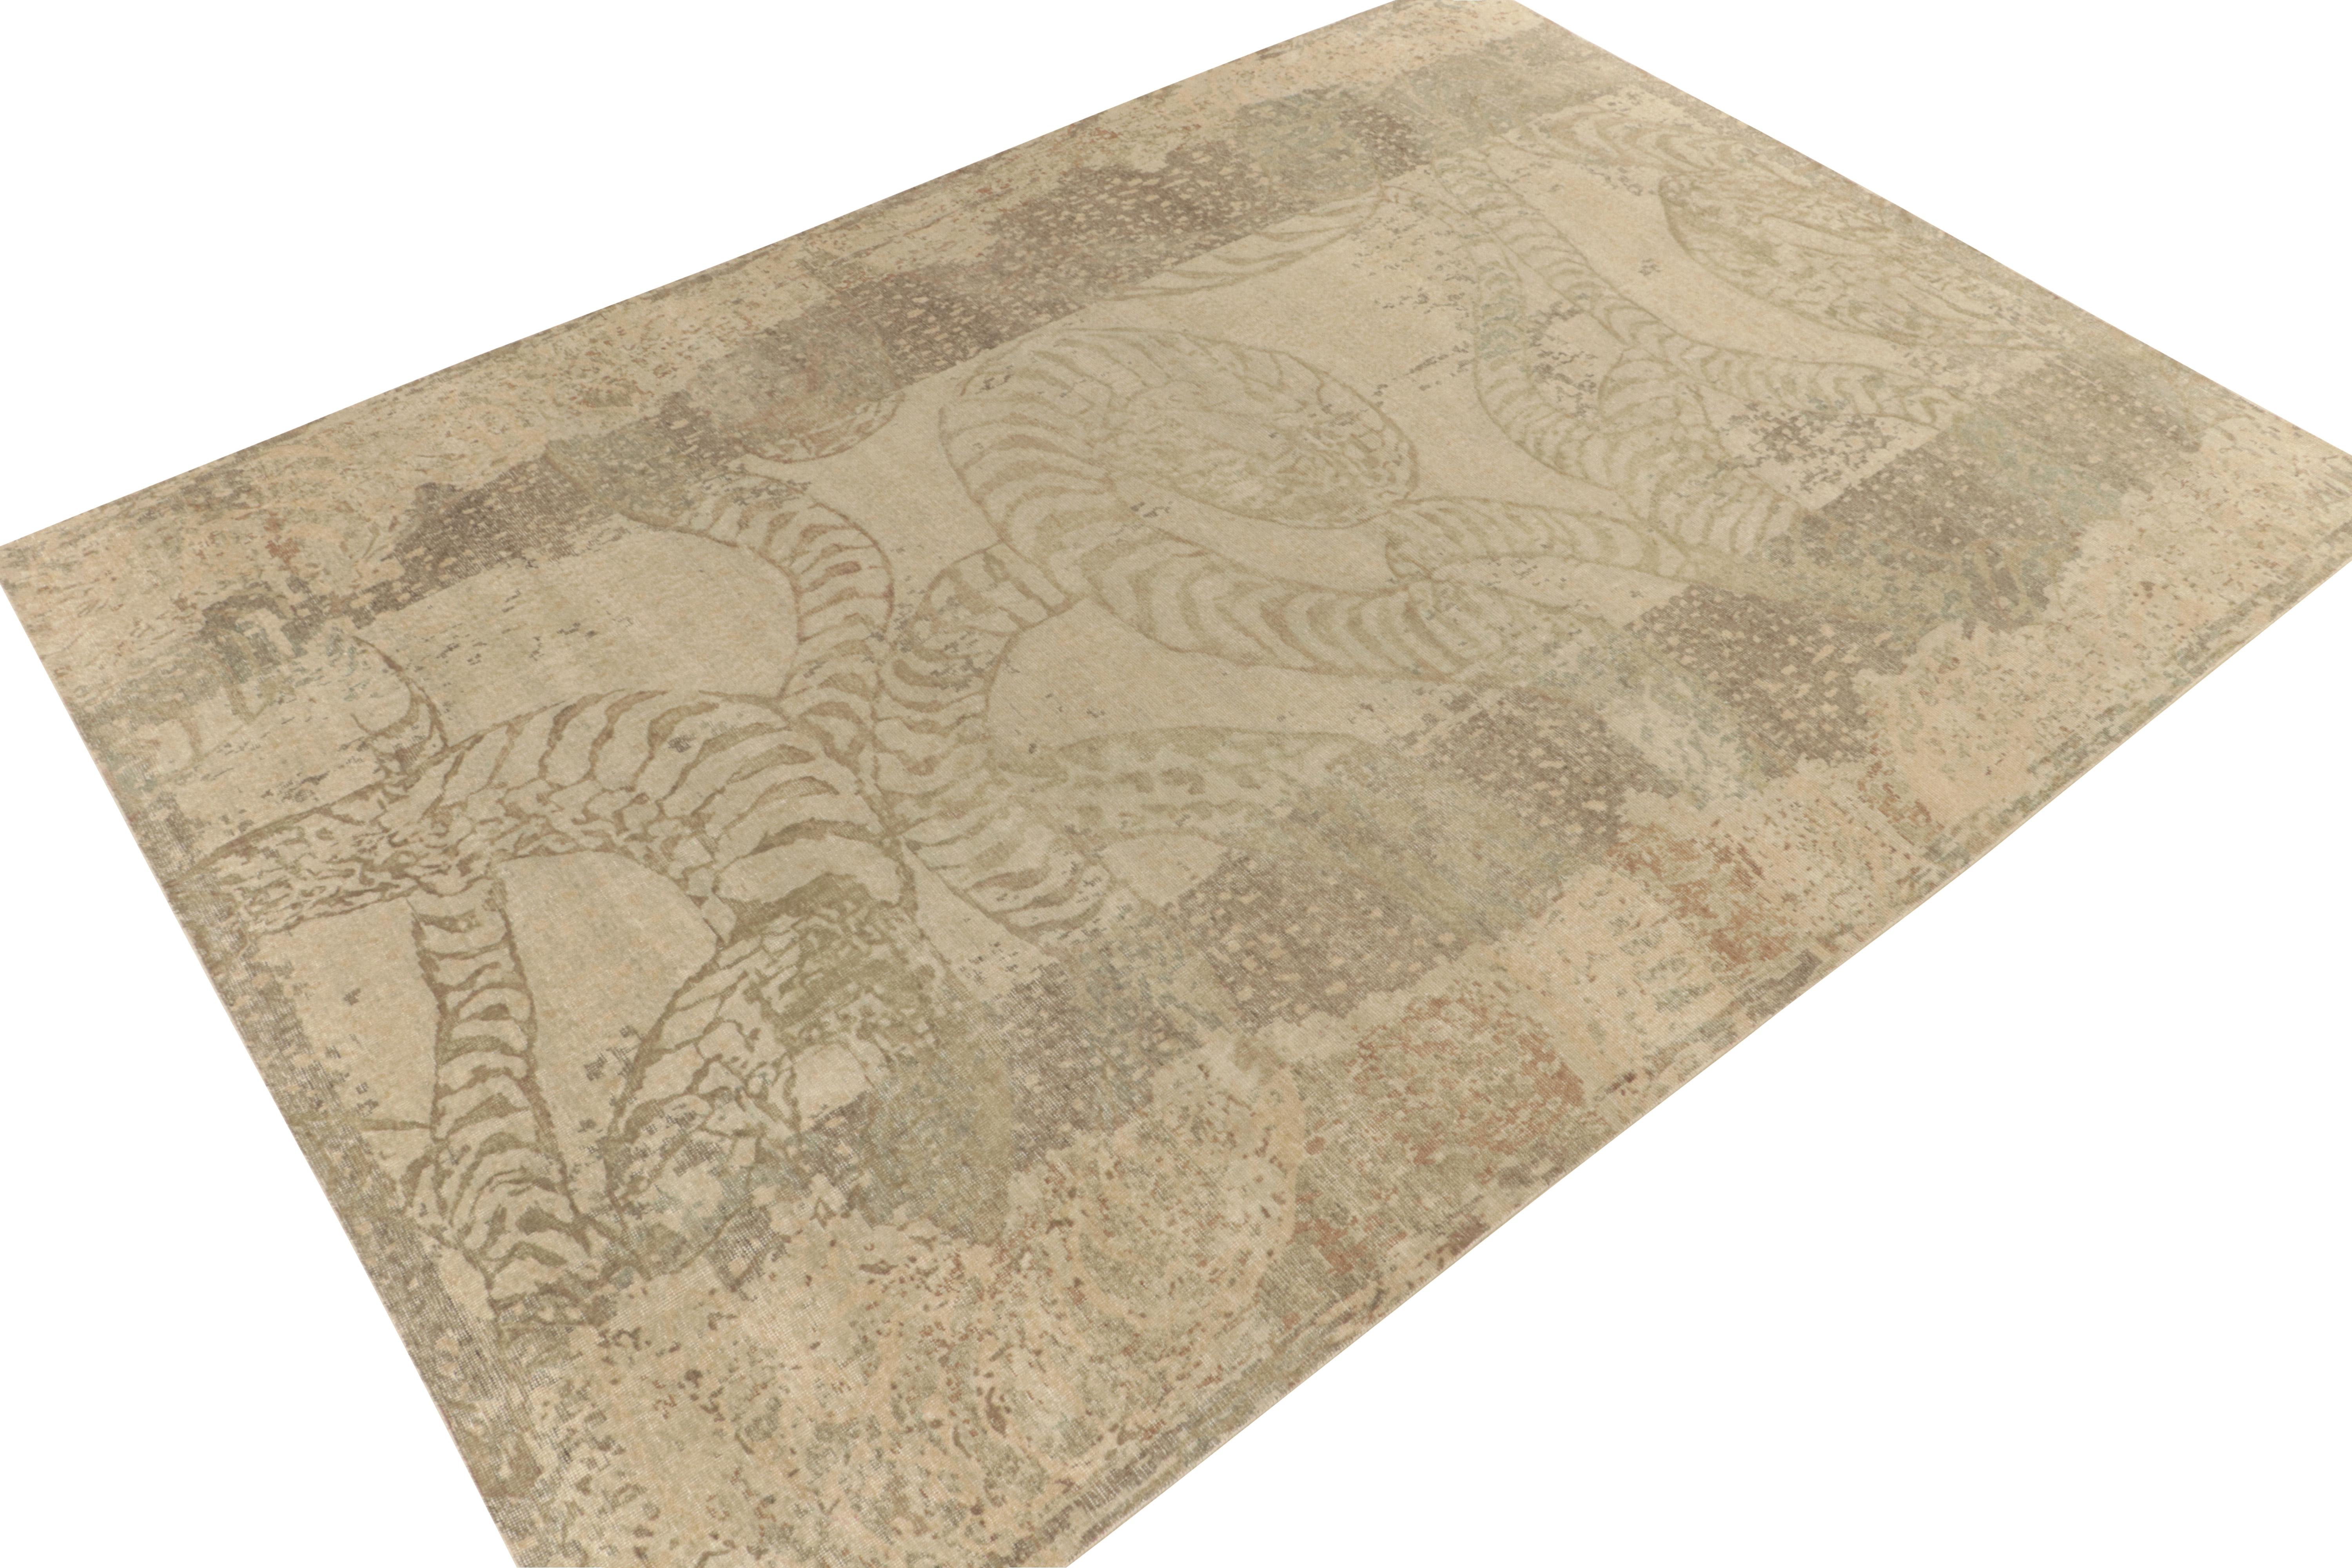 From Rug & Kilim’s Homage collection, a 10x14 distressed style abstract rug relishing a forgiving play of beige-brown and gray for a comfortable allure. Inspired by abstraction of animal skin rugs, the vision enjoys subtlety of color playing